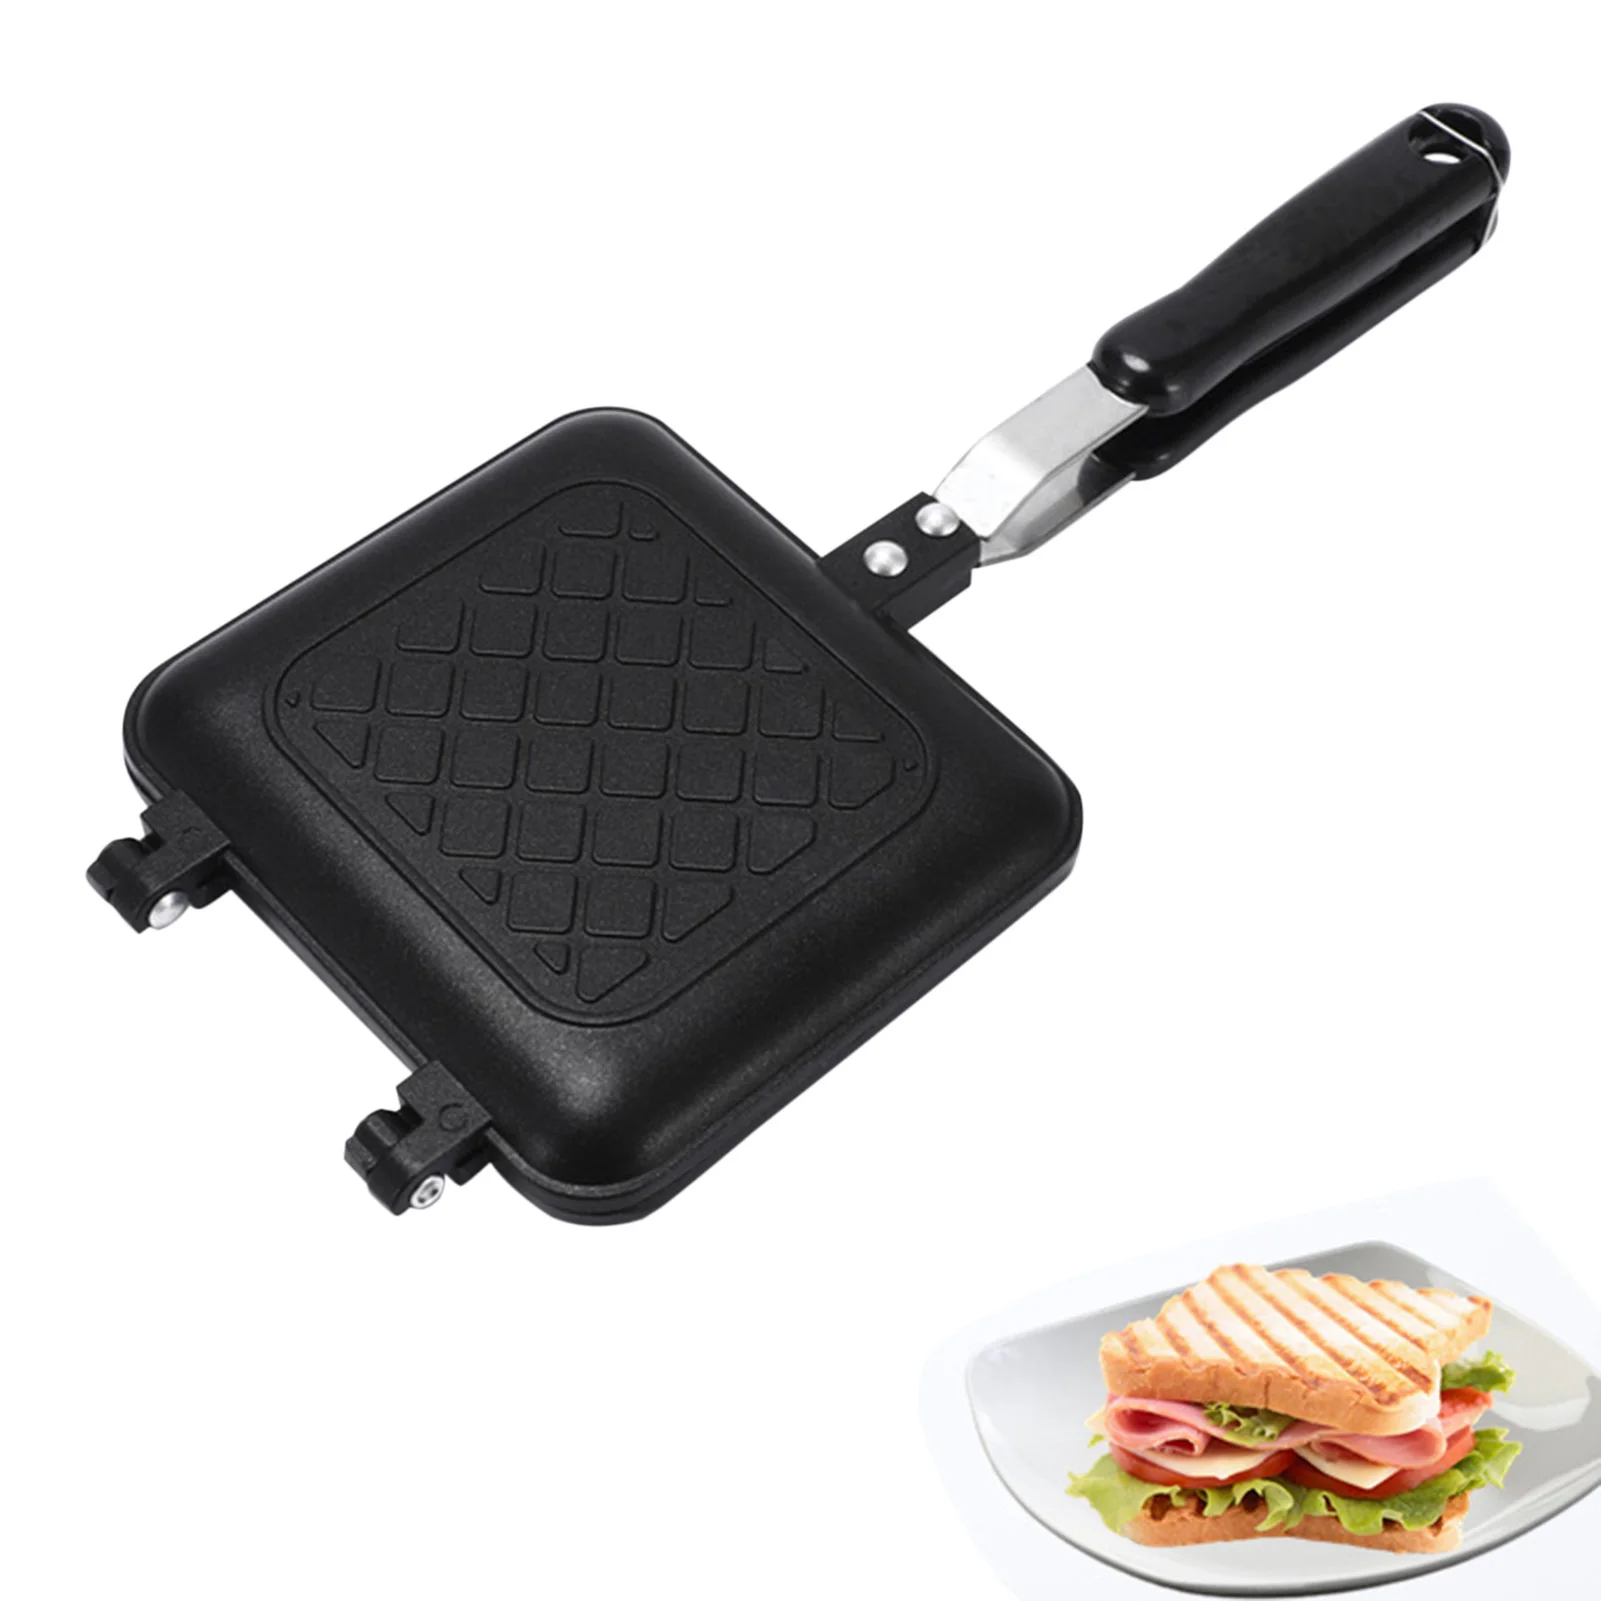 

Sandwich Maker Grill Pan Non-Stick Pan Waffle Toaster Cake Breakfast Machine Barbecue Steak Frying Oven Camping W0 Elegance